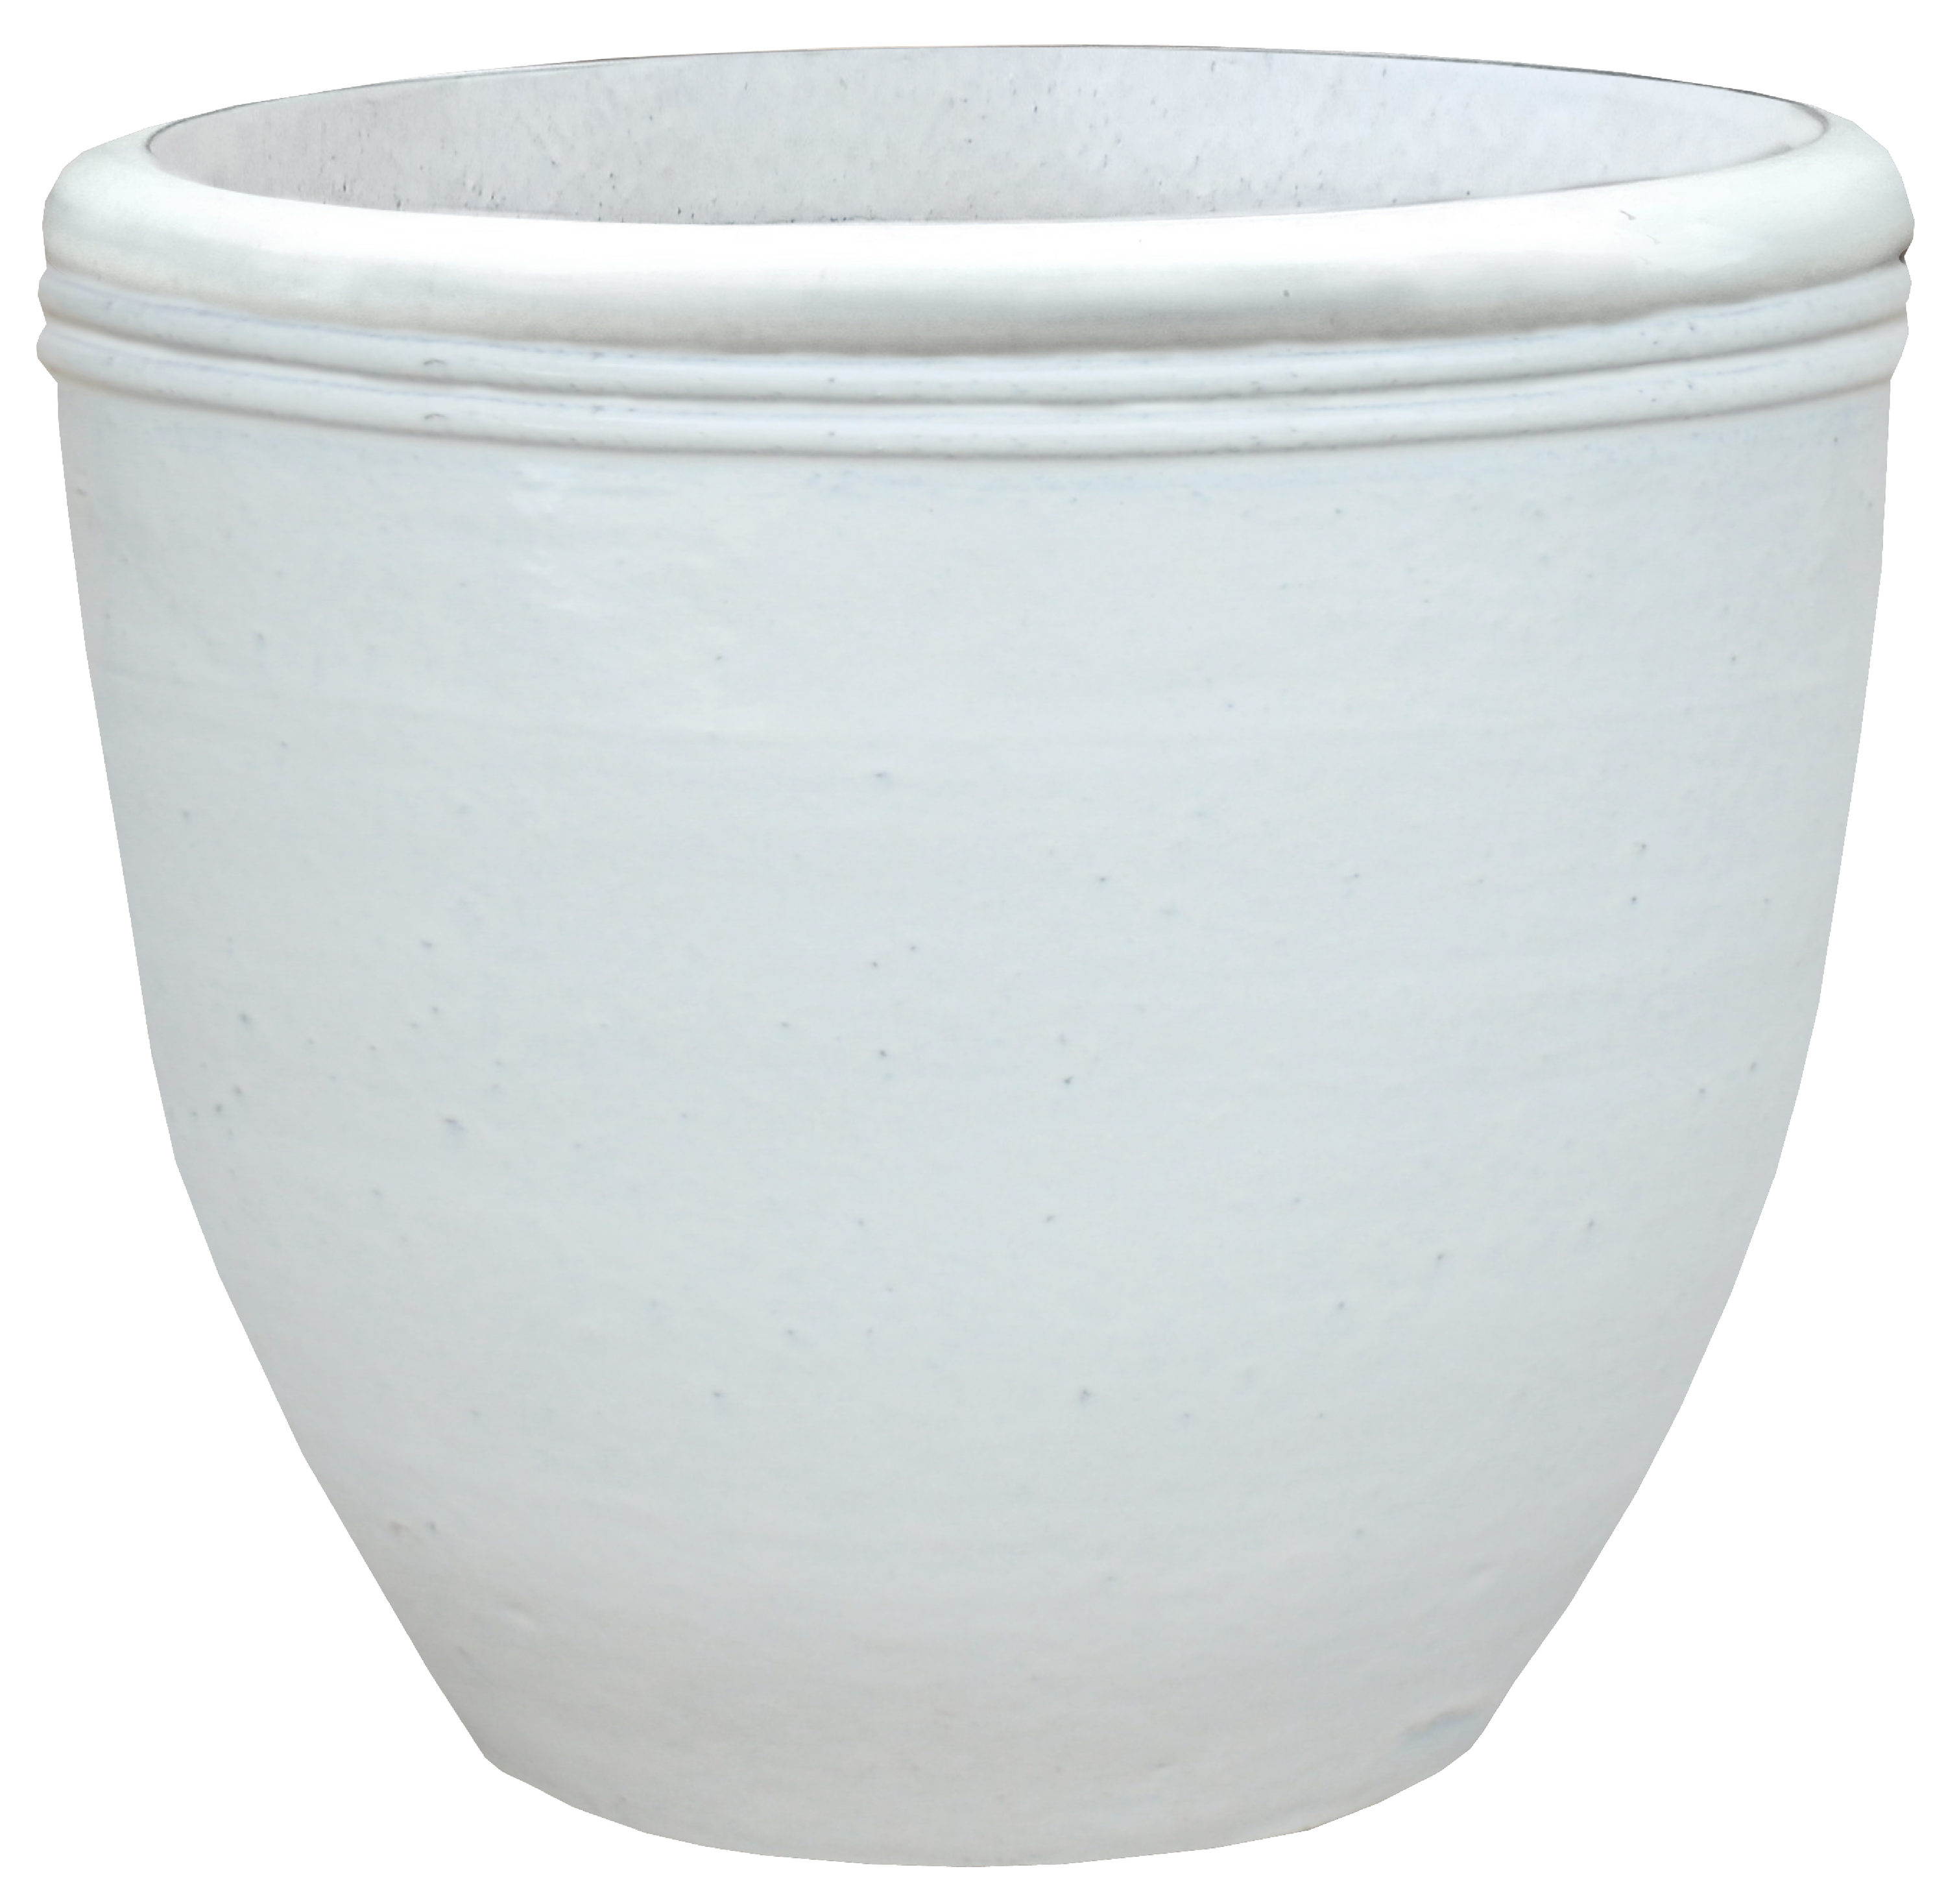 Large Plant Flower pots with Drainage Holes White Round Ceramic Flower pots Flower pots Suitable for Both Indoor and Outdoor Simple and Beautiful Pure White Ceramic Flower pots 